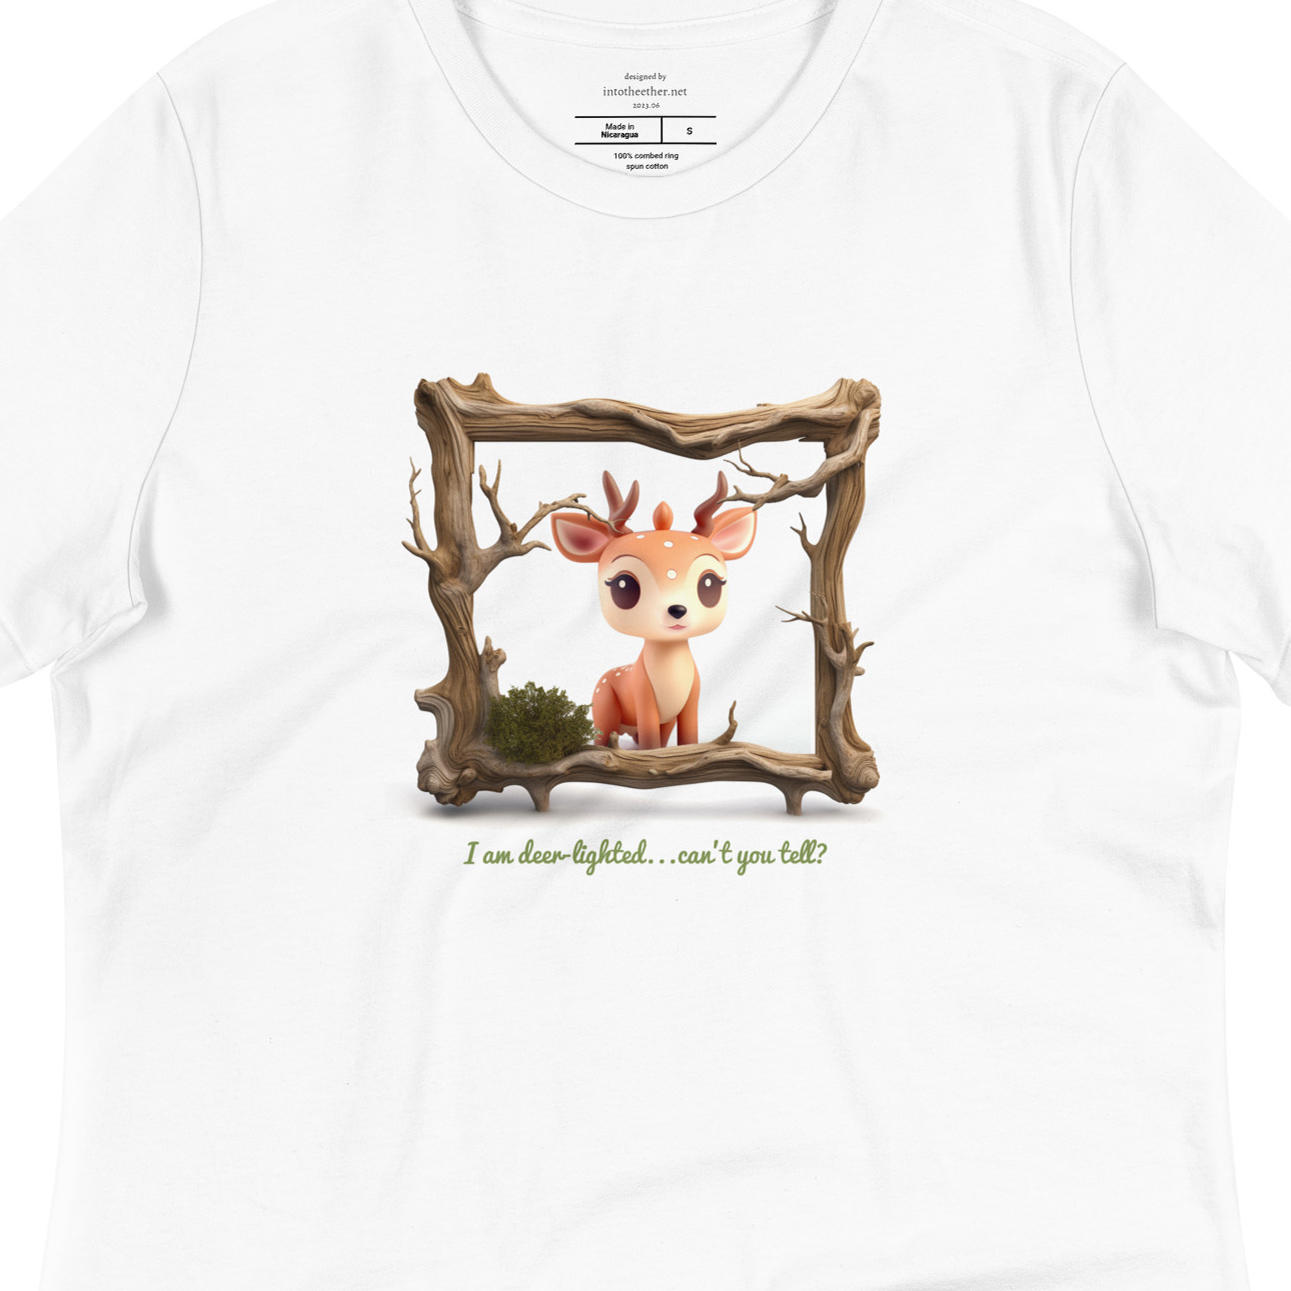 I'm Deer-lighted...can't you tell? | Women's T-shirt